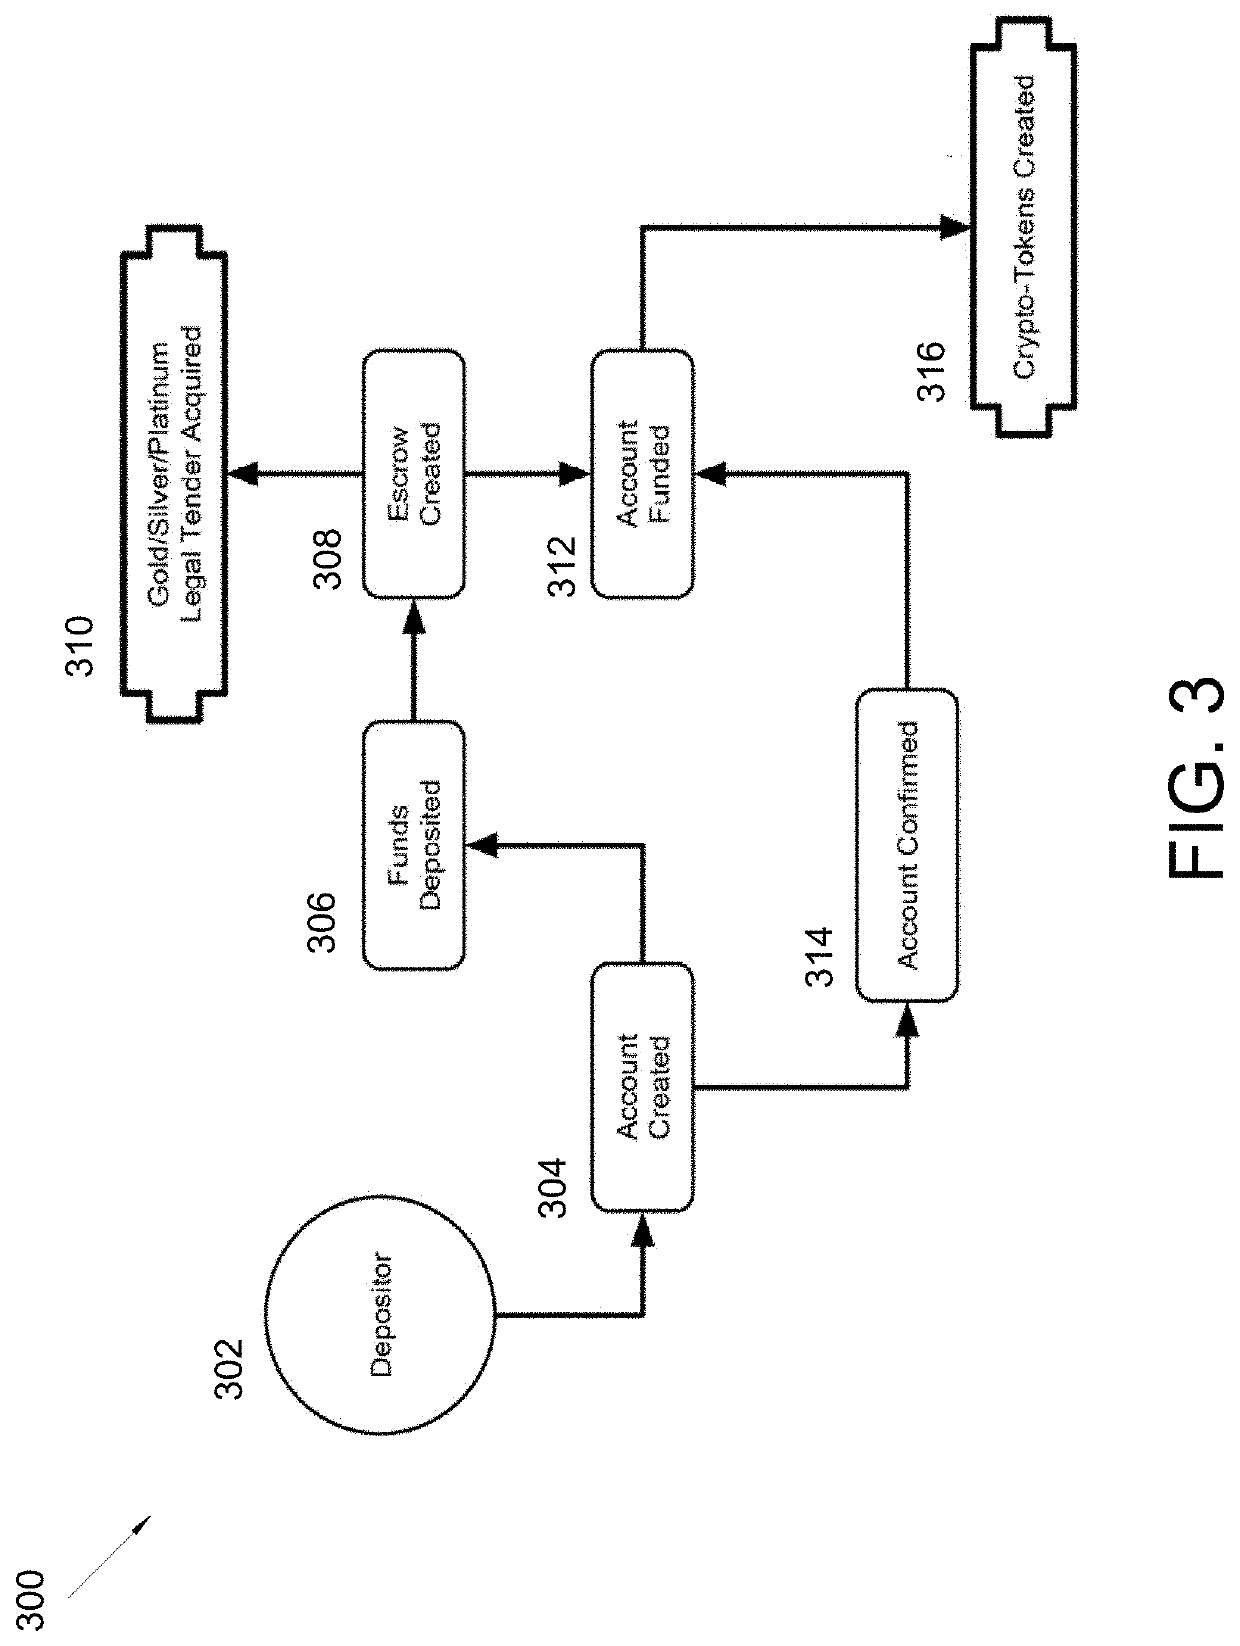 Method for Performing Transactions With Exchangeable Cryptocurrency and Legal Tender Currency